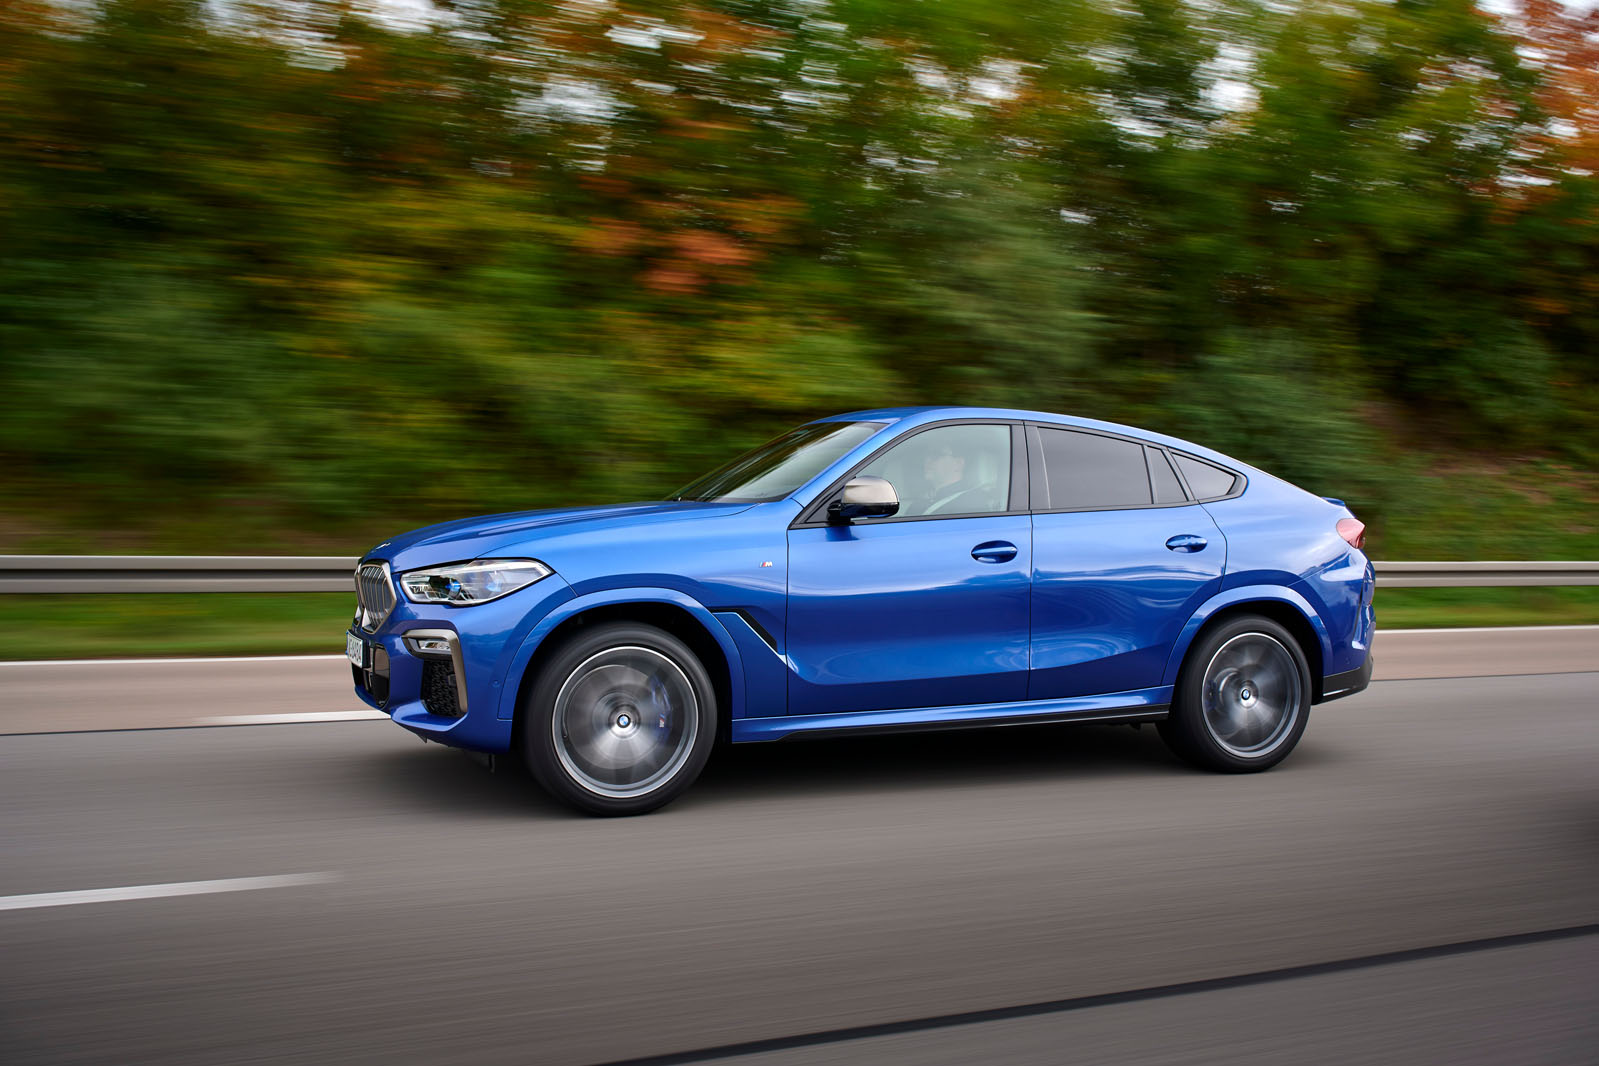 BMW X6 M50i 2019 road test review - hero side